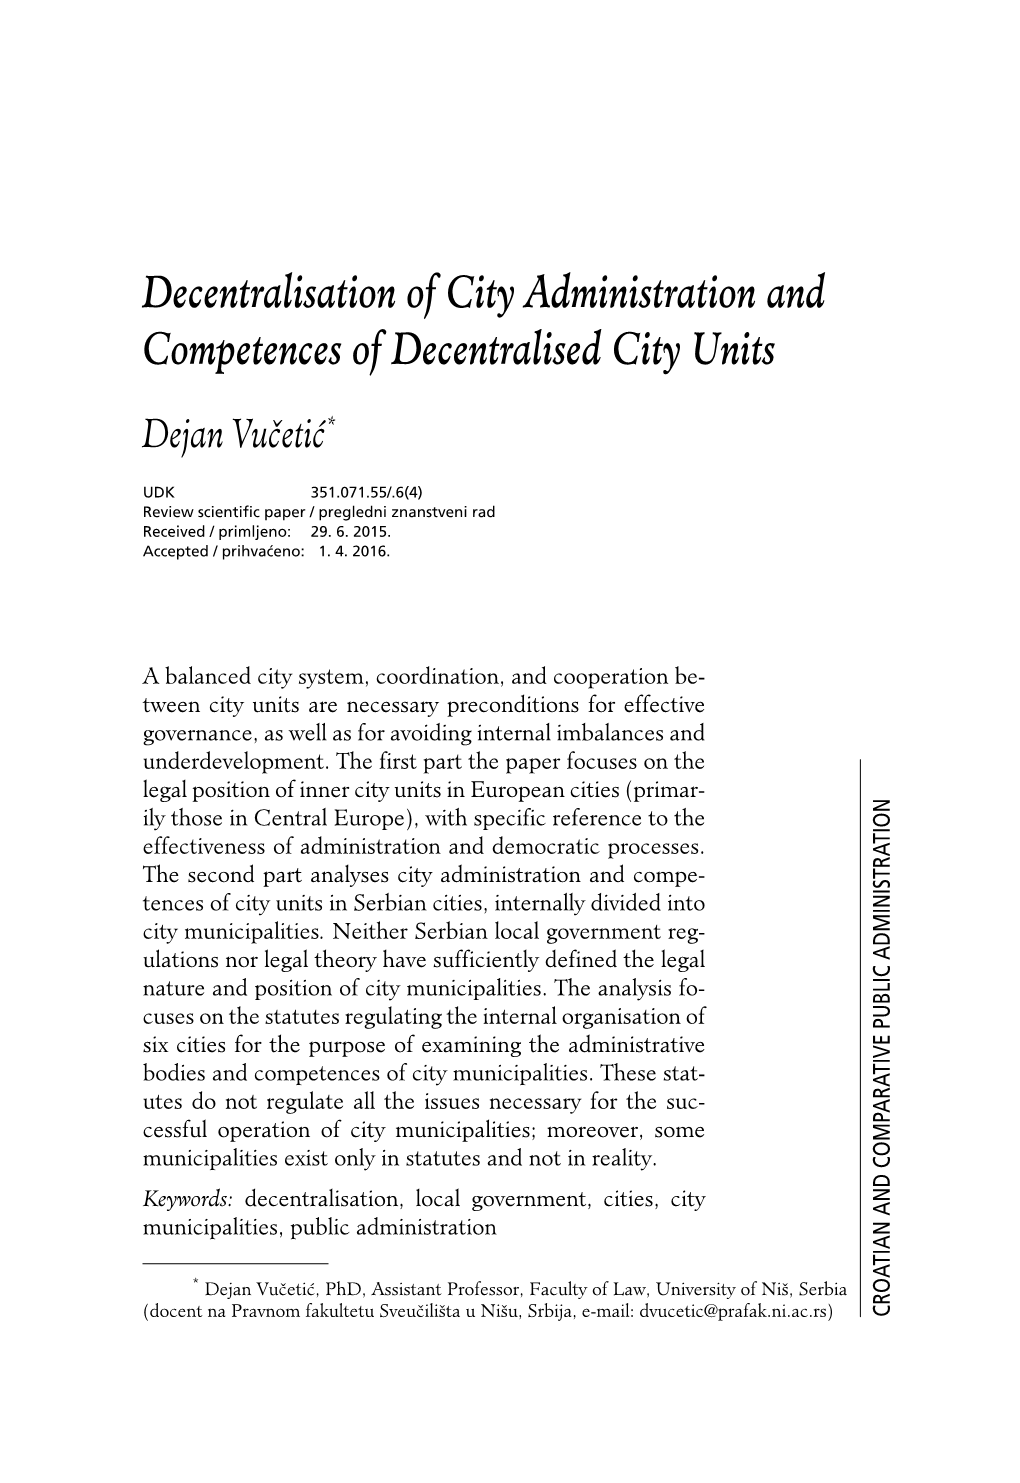 Decentralisation of City Administration and Competences of Decentralised City Units